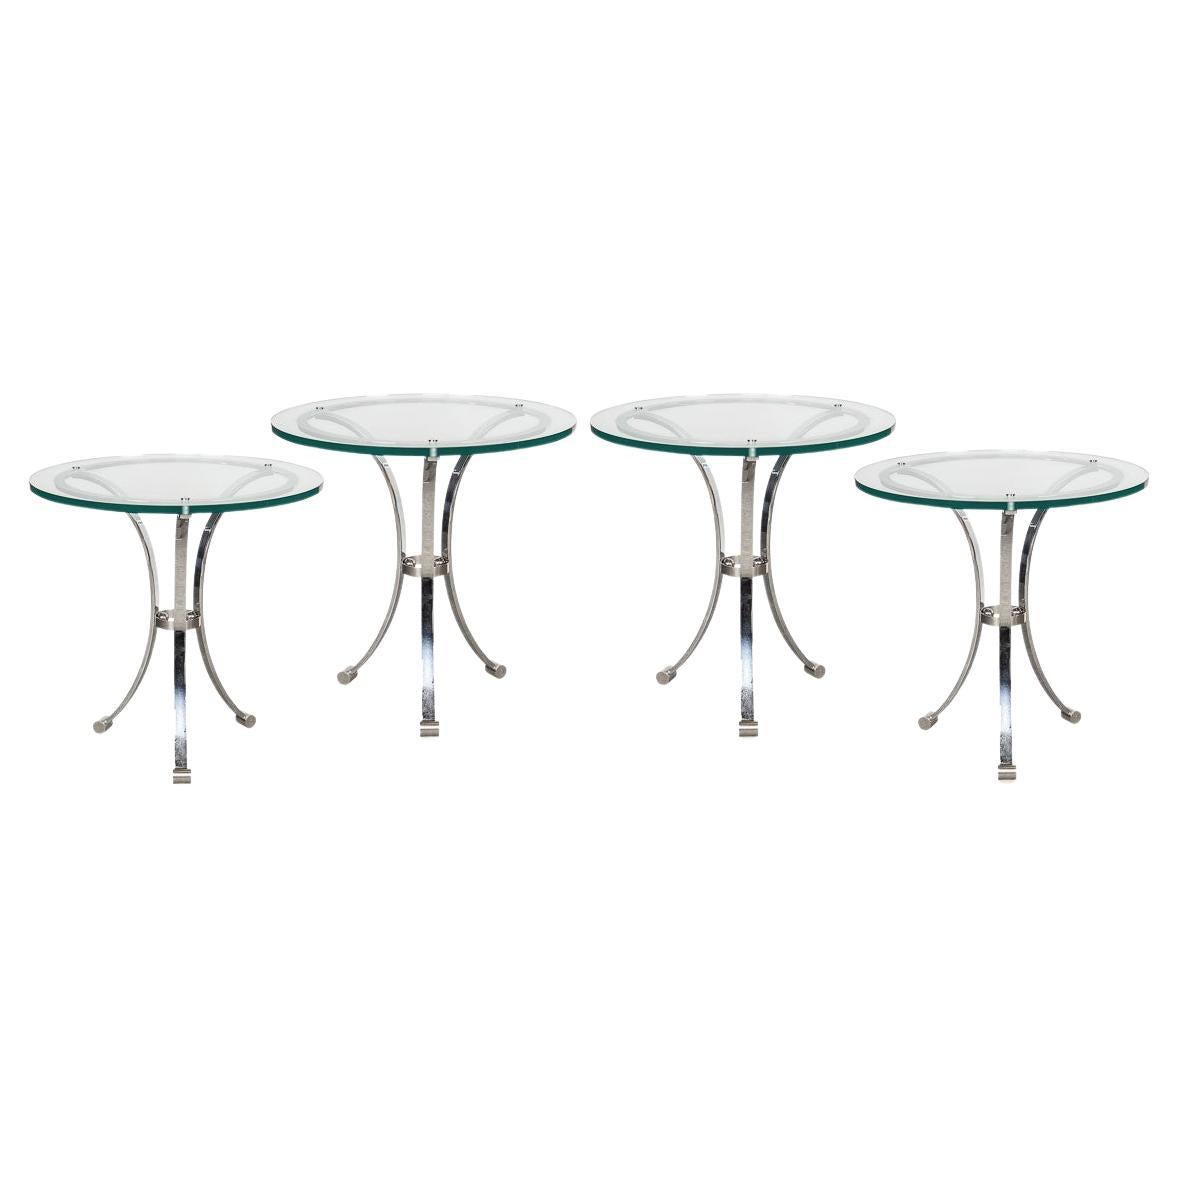 Set of Four Bar Tables from the Waldorf Hotel, New York, C.1940